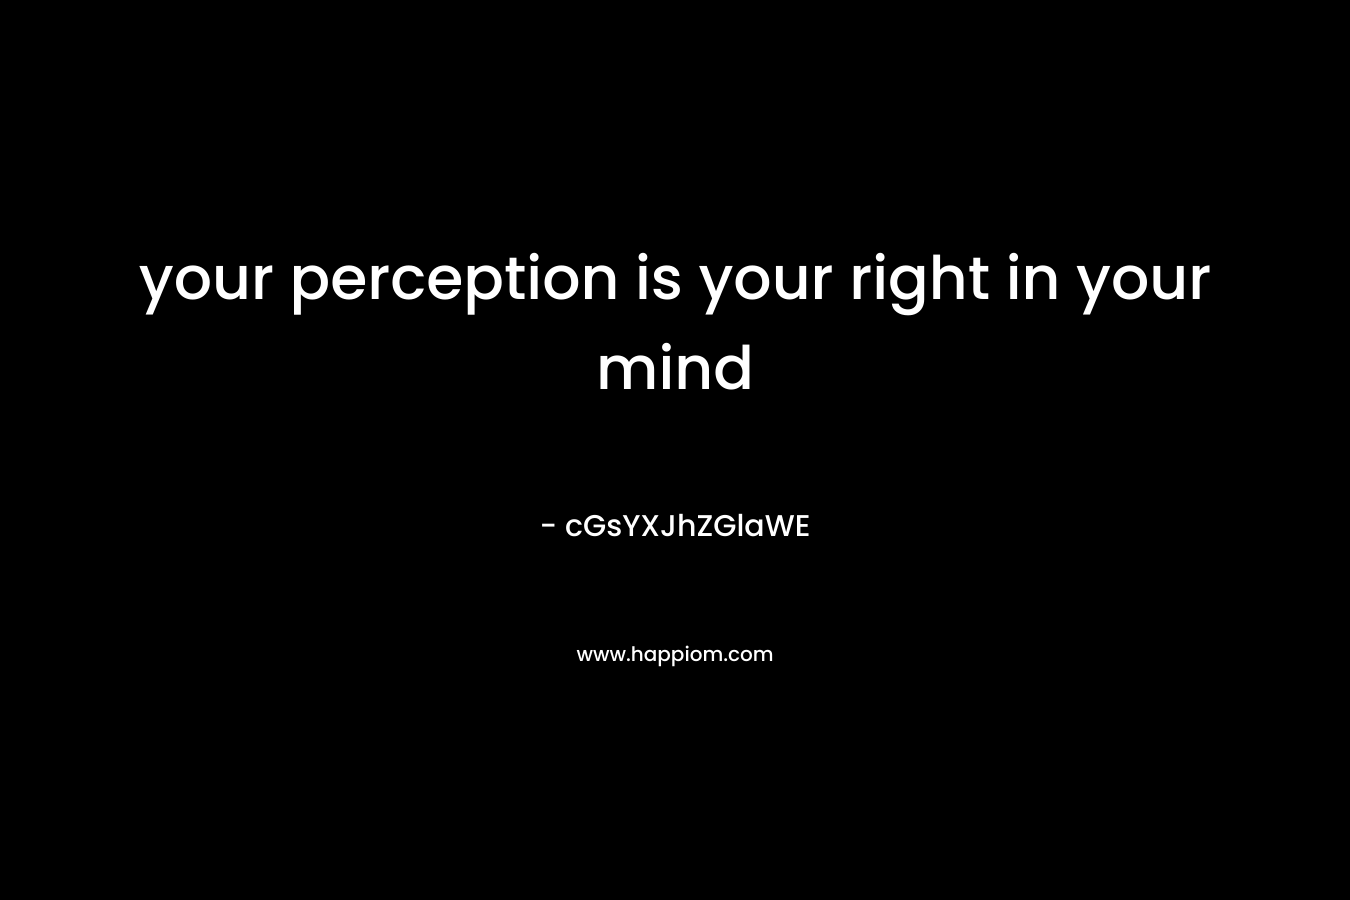 your perception is your right in your mind